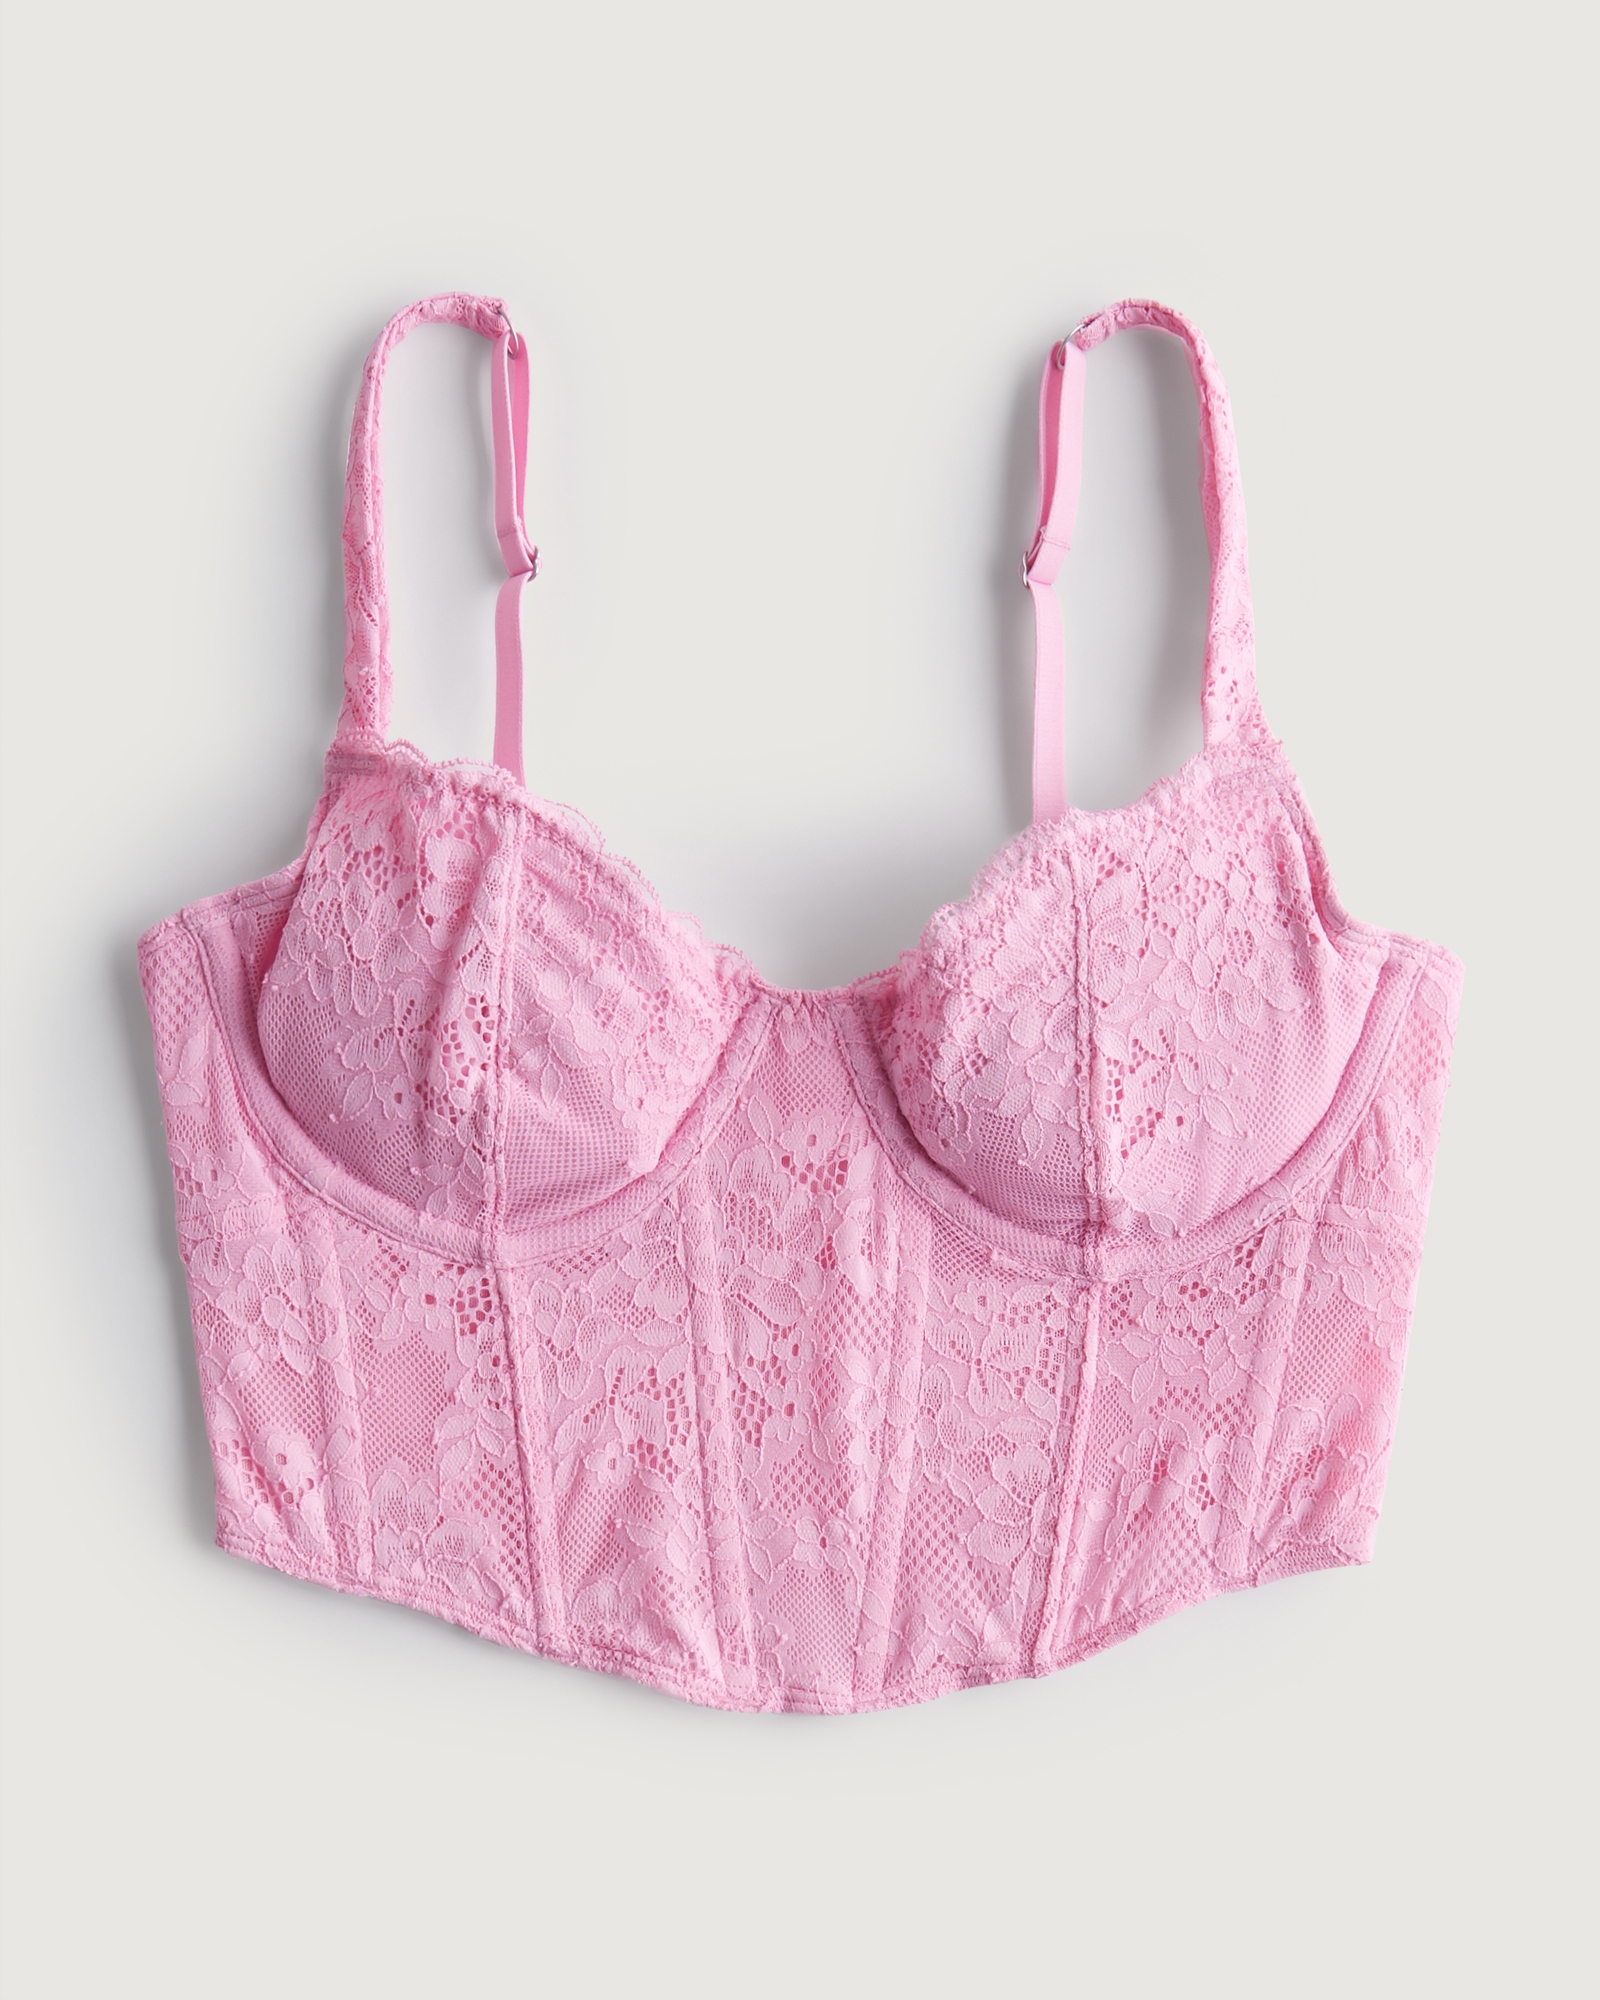 She's Trouble Lace Corset Top (Pink)